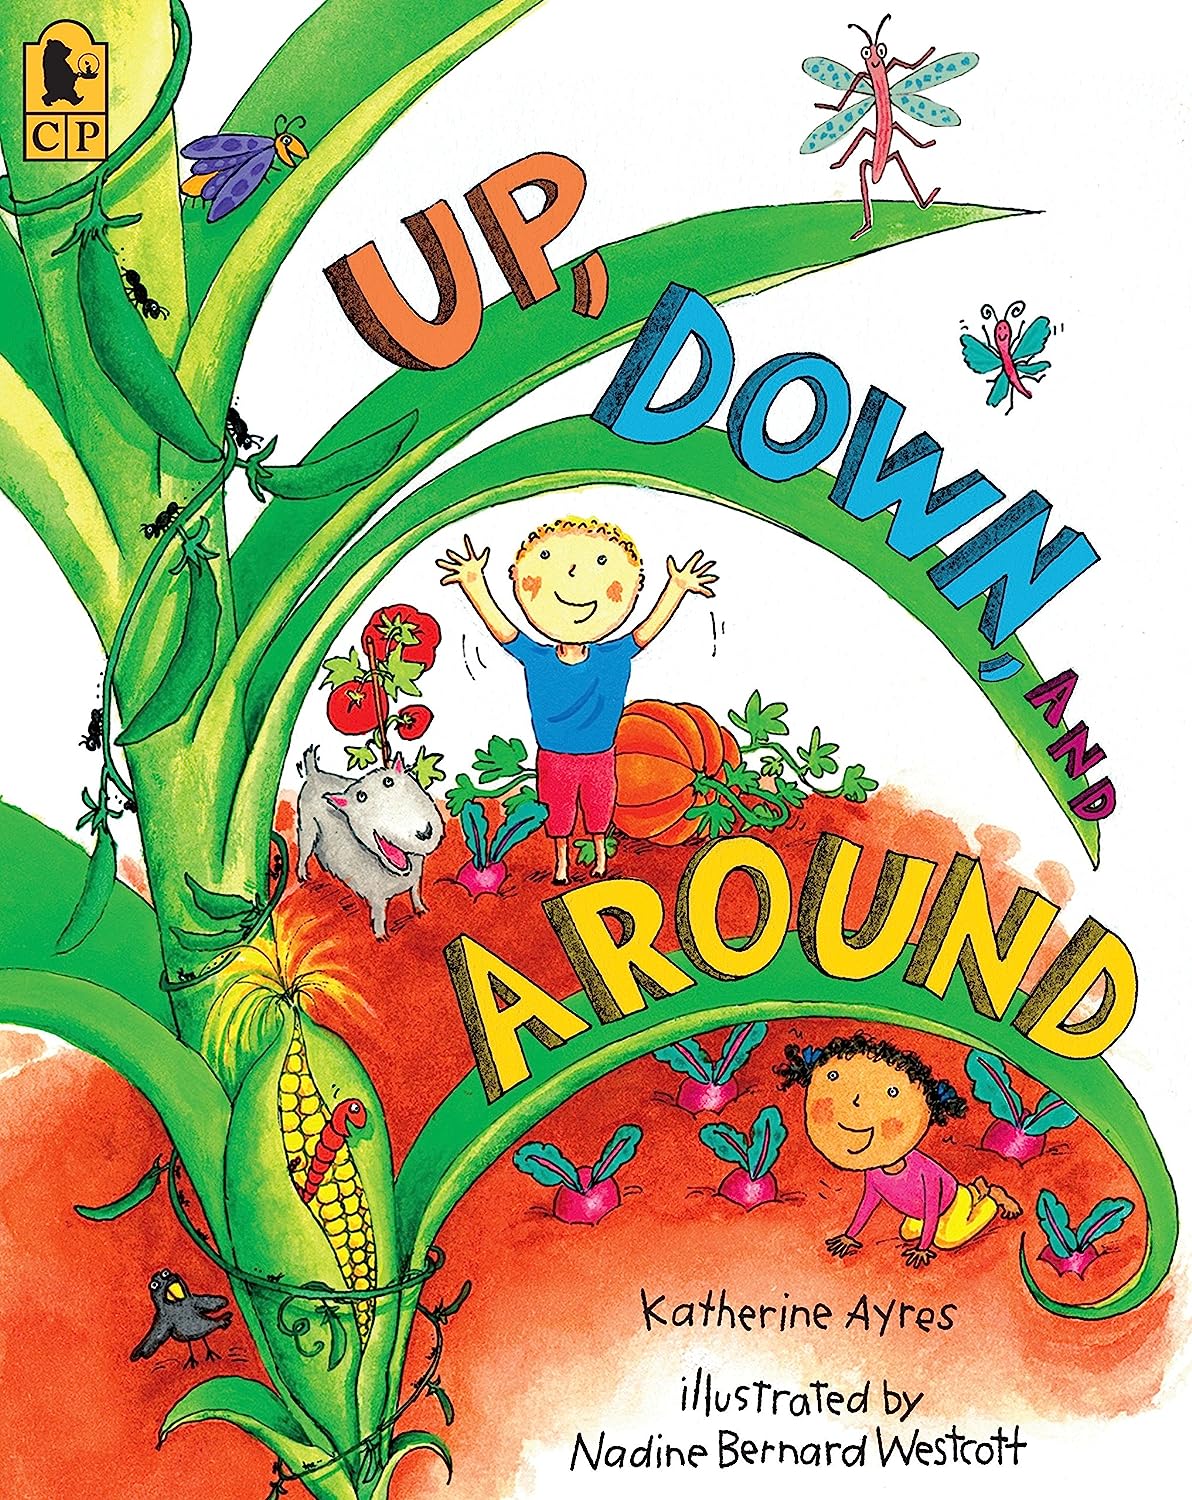 Up, Down and Around by Katherine Ayres | illustrated by Nadine Bernard Westcott